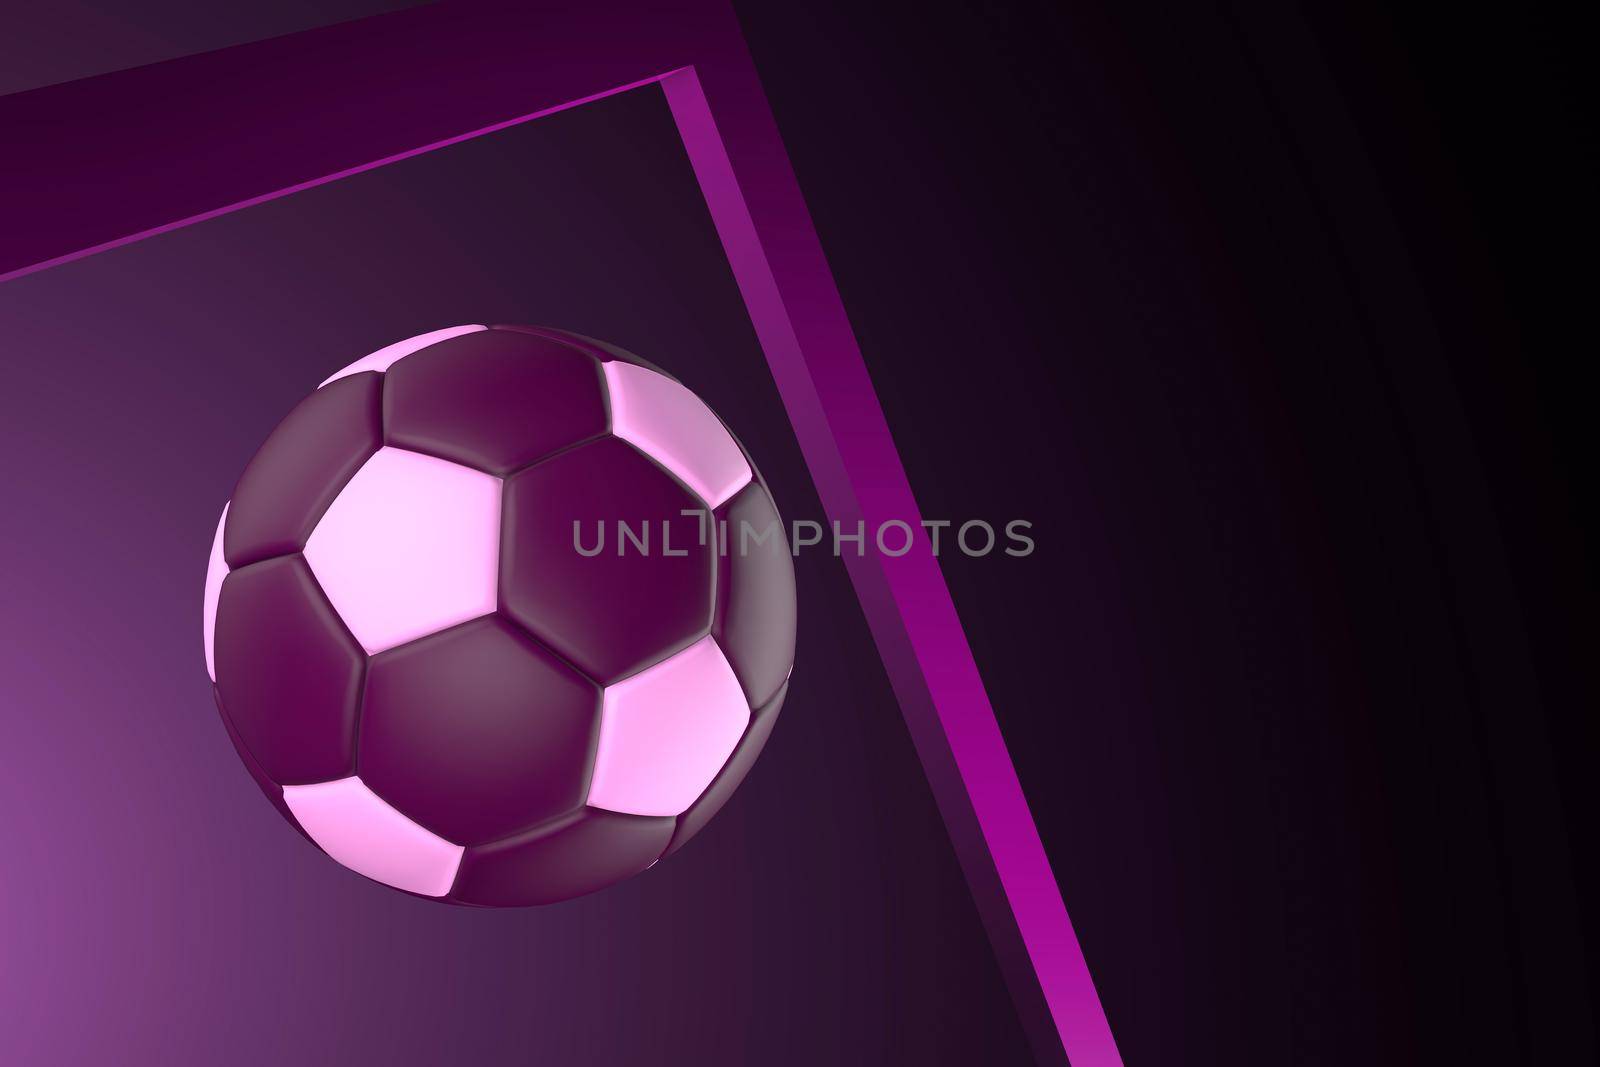 Classic 3D soccer ball crosses the gate in the dark by Skaron